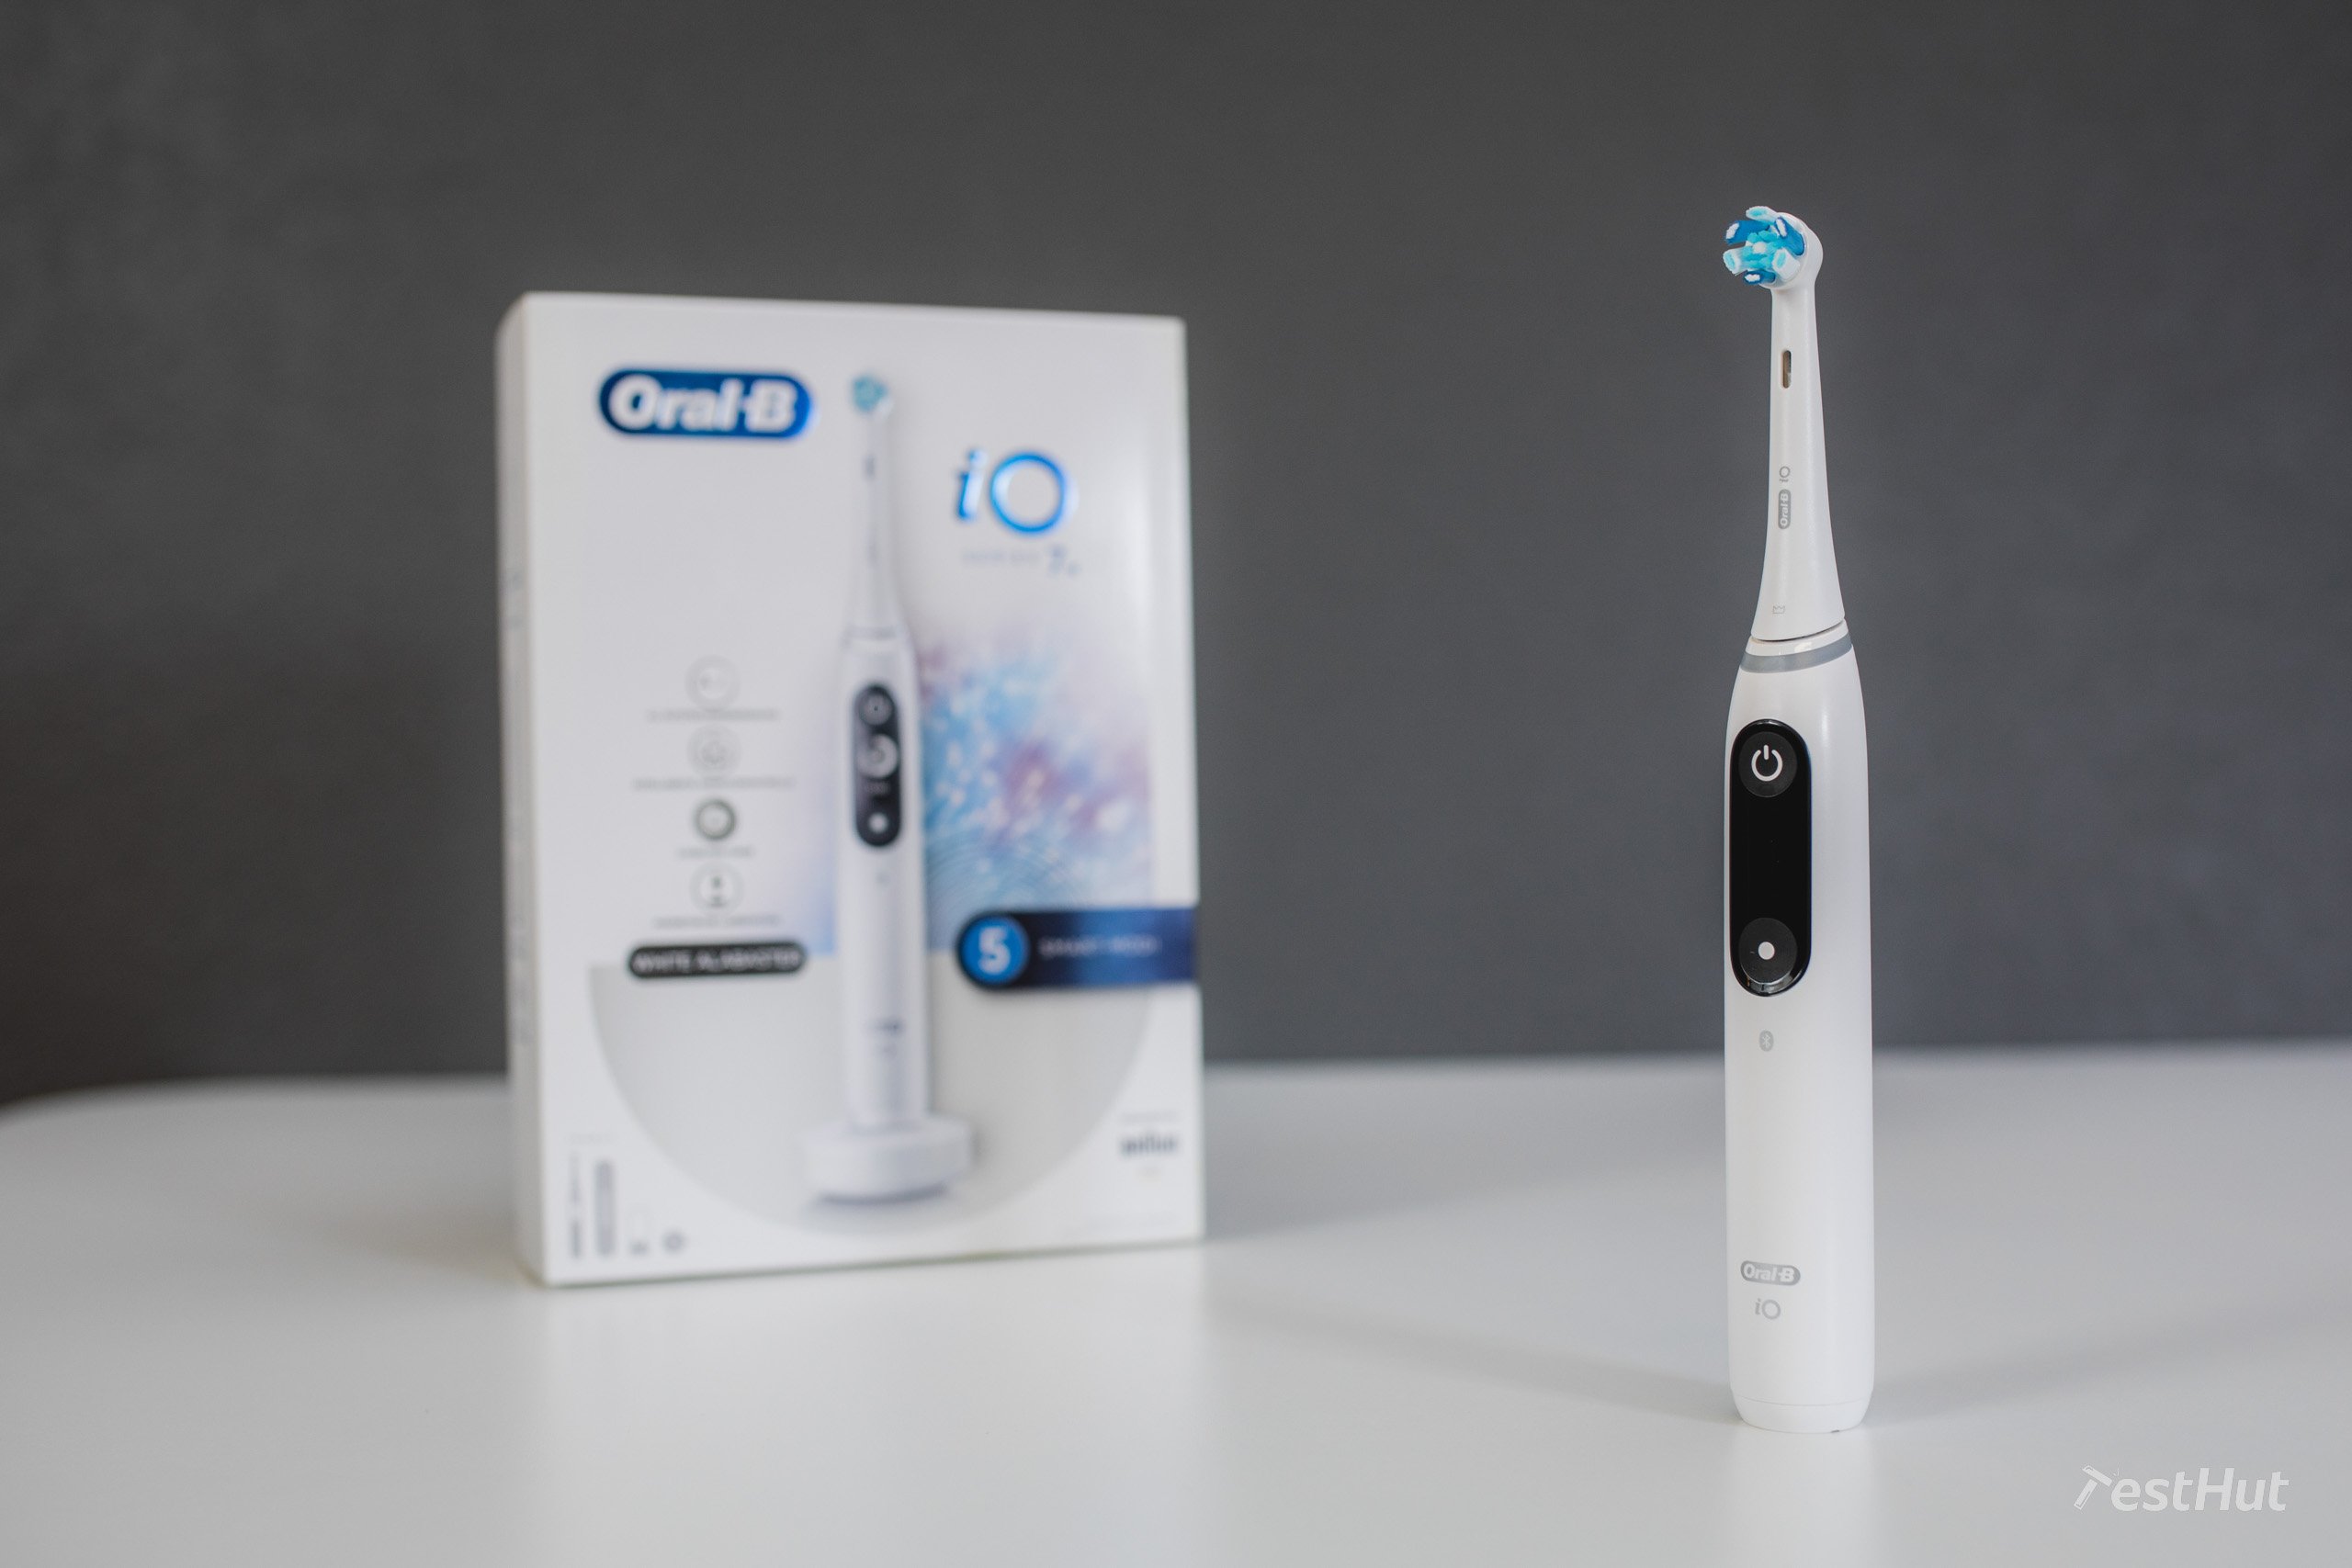 Bijdrage Doodt Flash Oral-B iO 7 Review: Is it a Game Changer? | Tested by TestHut